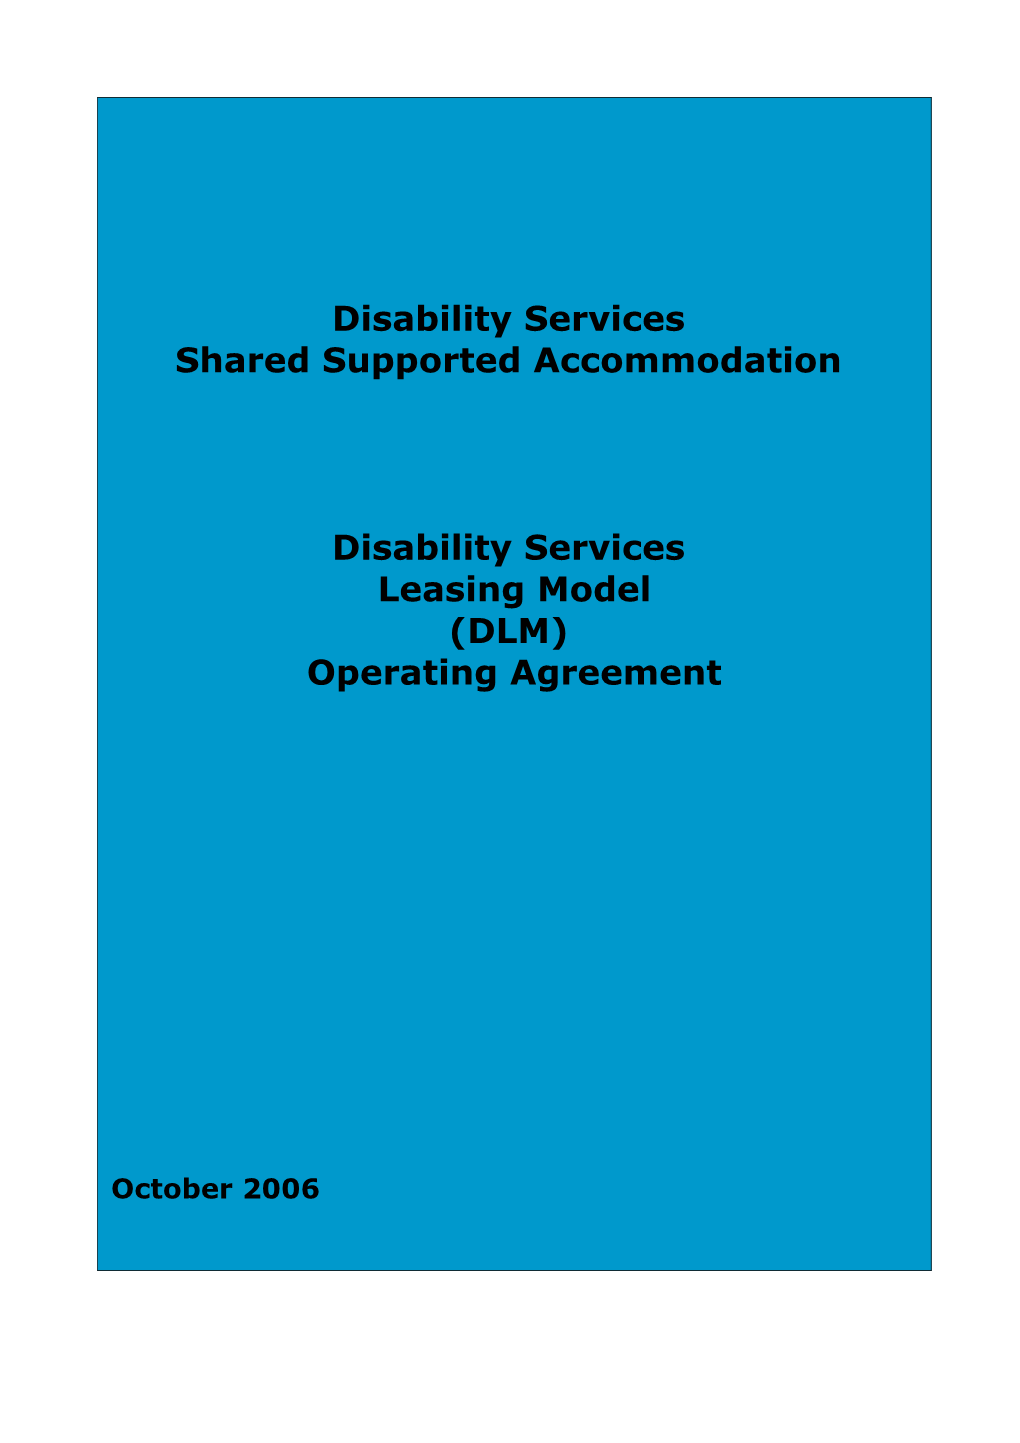 Disability Leasing Model Operating Agreement